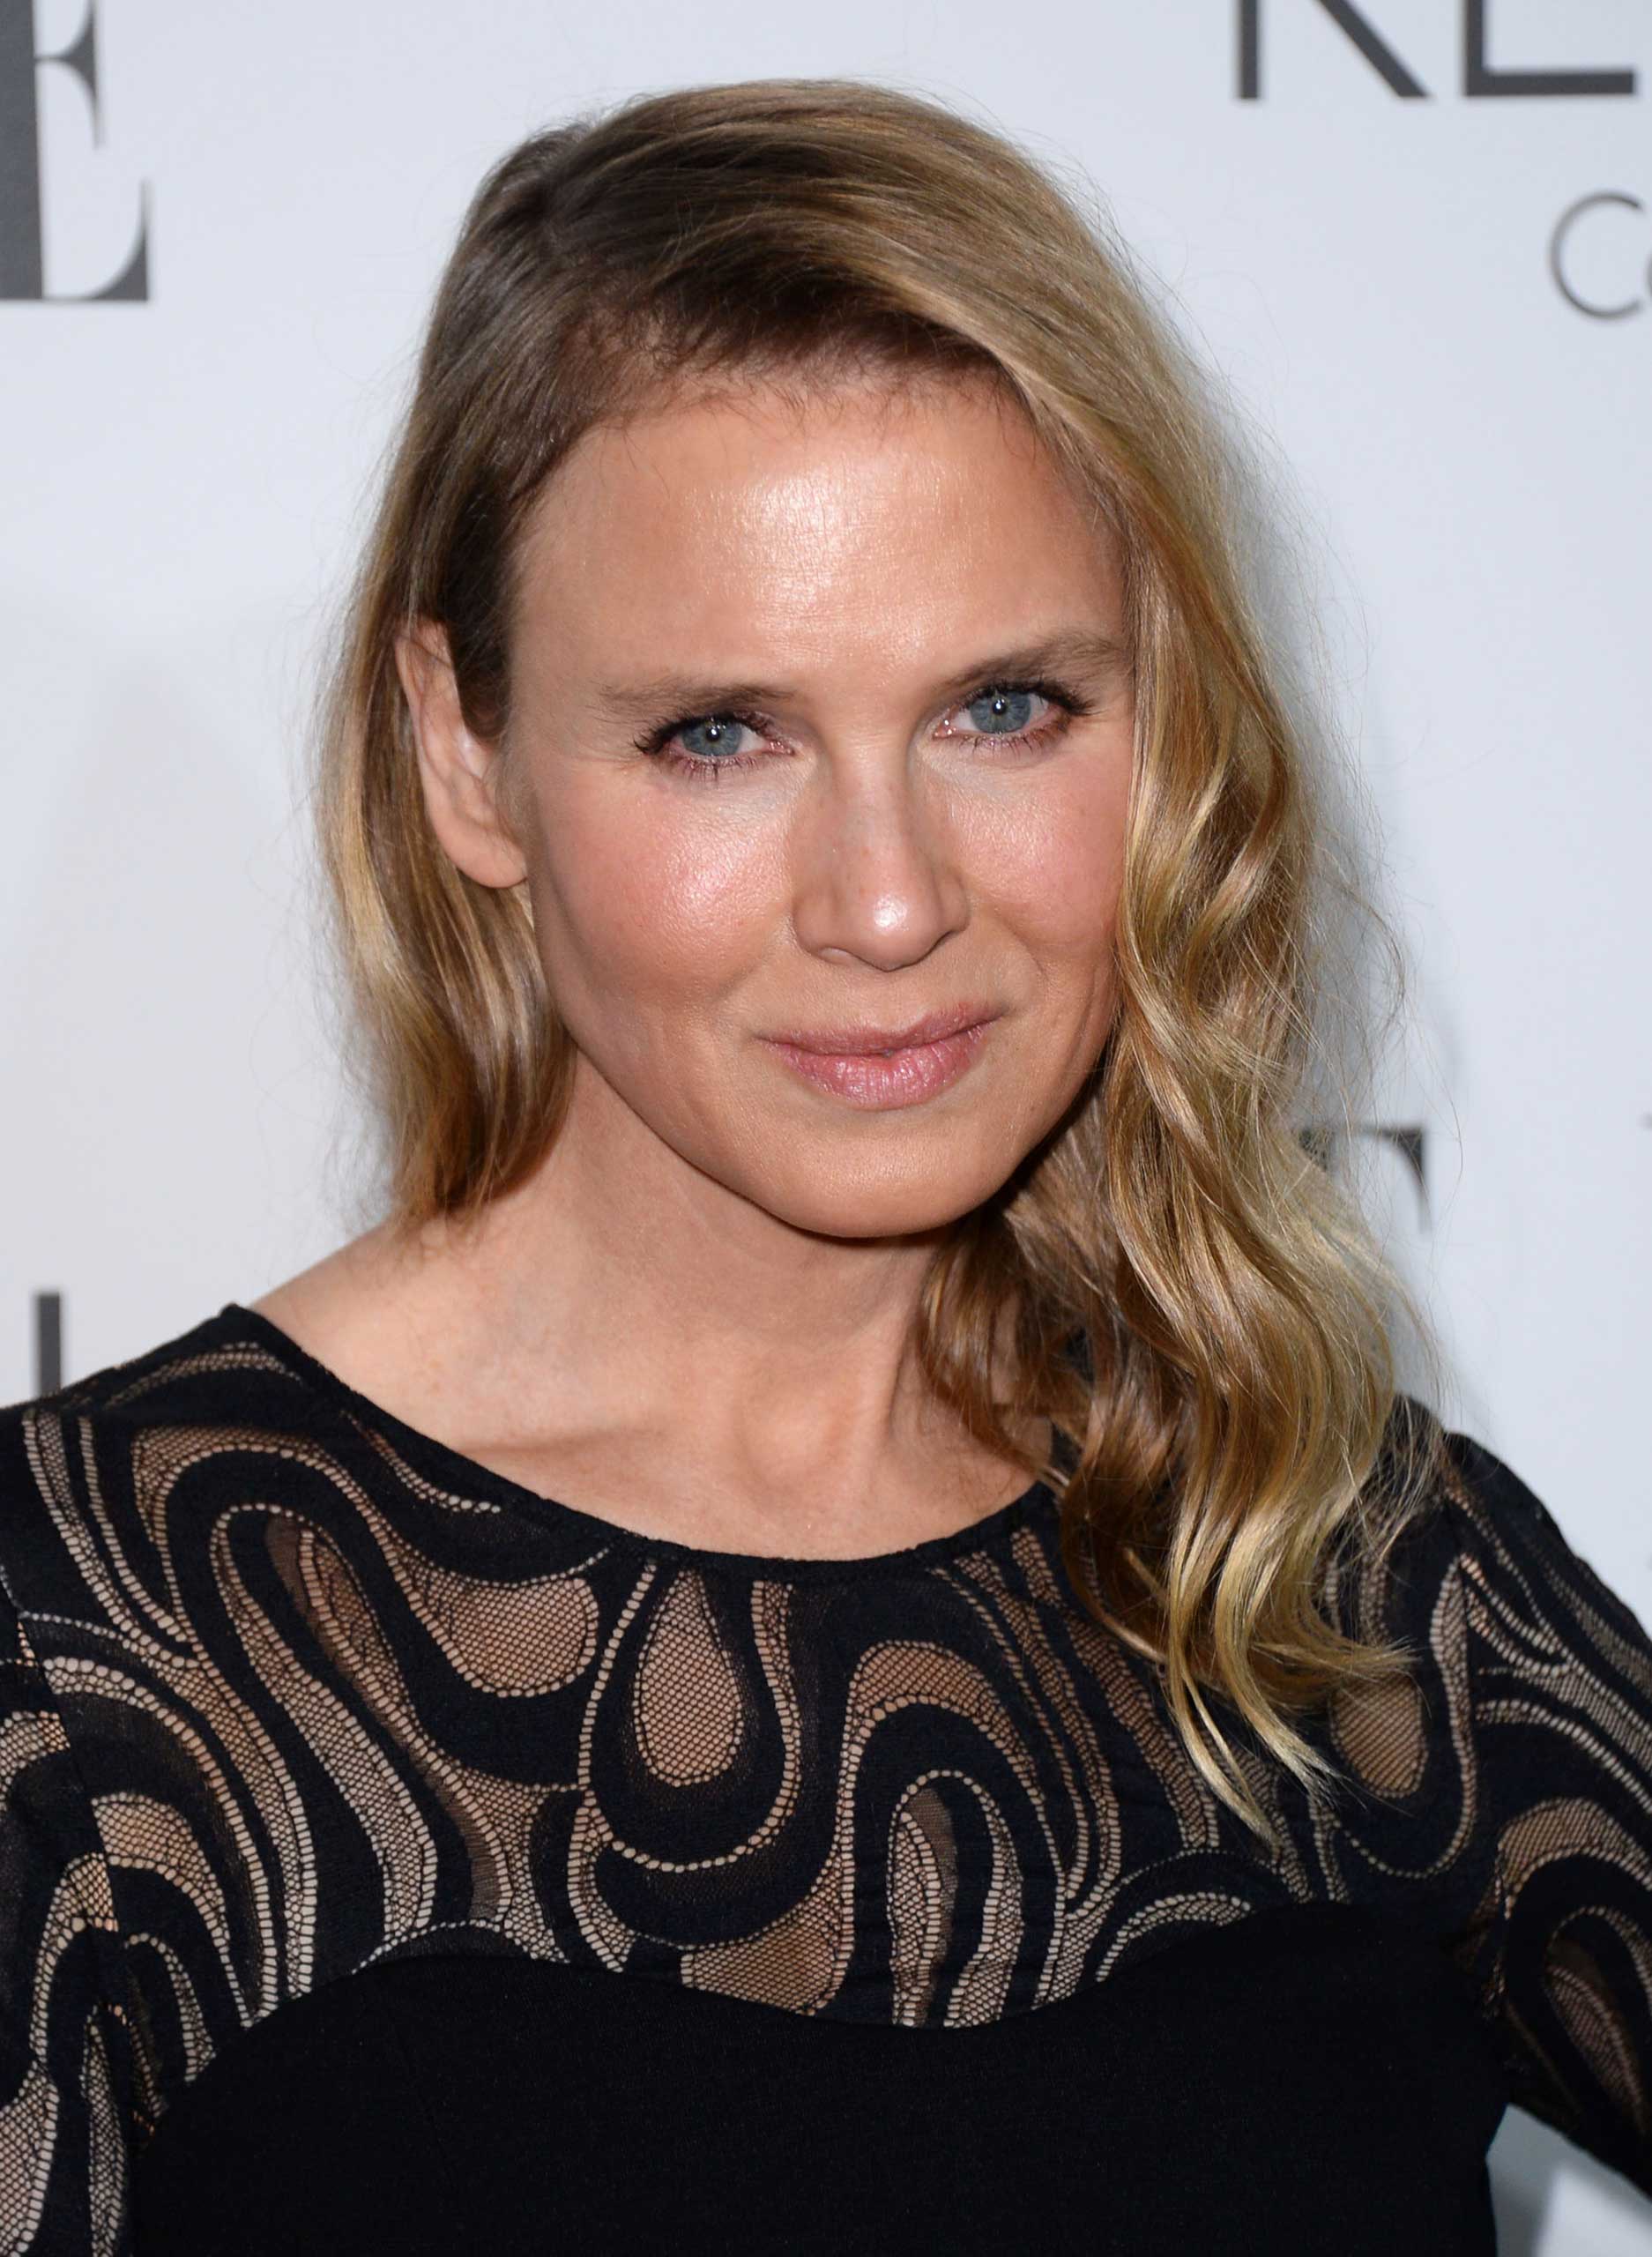 Renee Zellweger arrives at ELLE's 21st annual Women In Hollywood Awards at the Four Season Hotel on Oct. 20, 2014, in Los Angeles. (Jordan Strauss—Invision/AP)